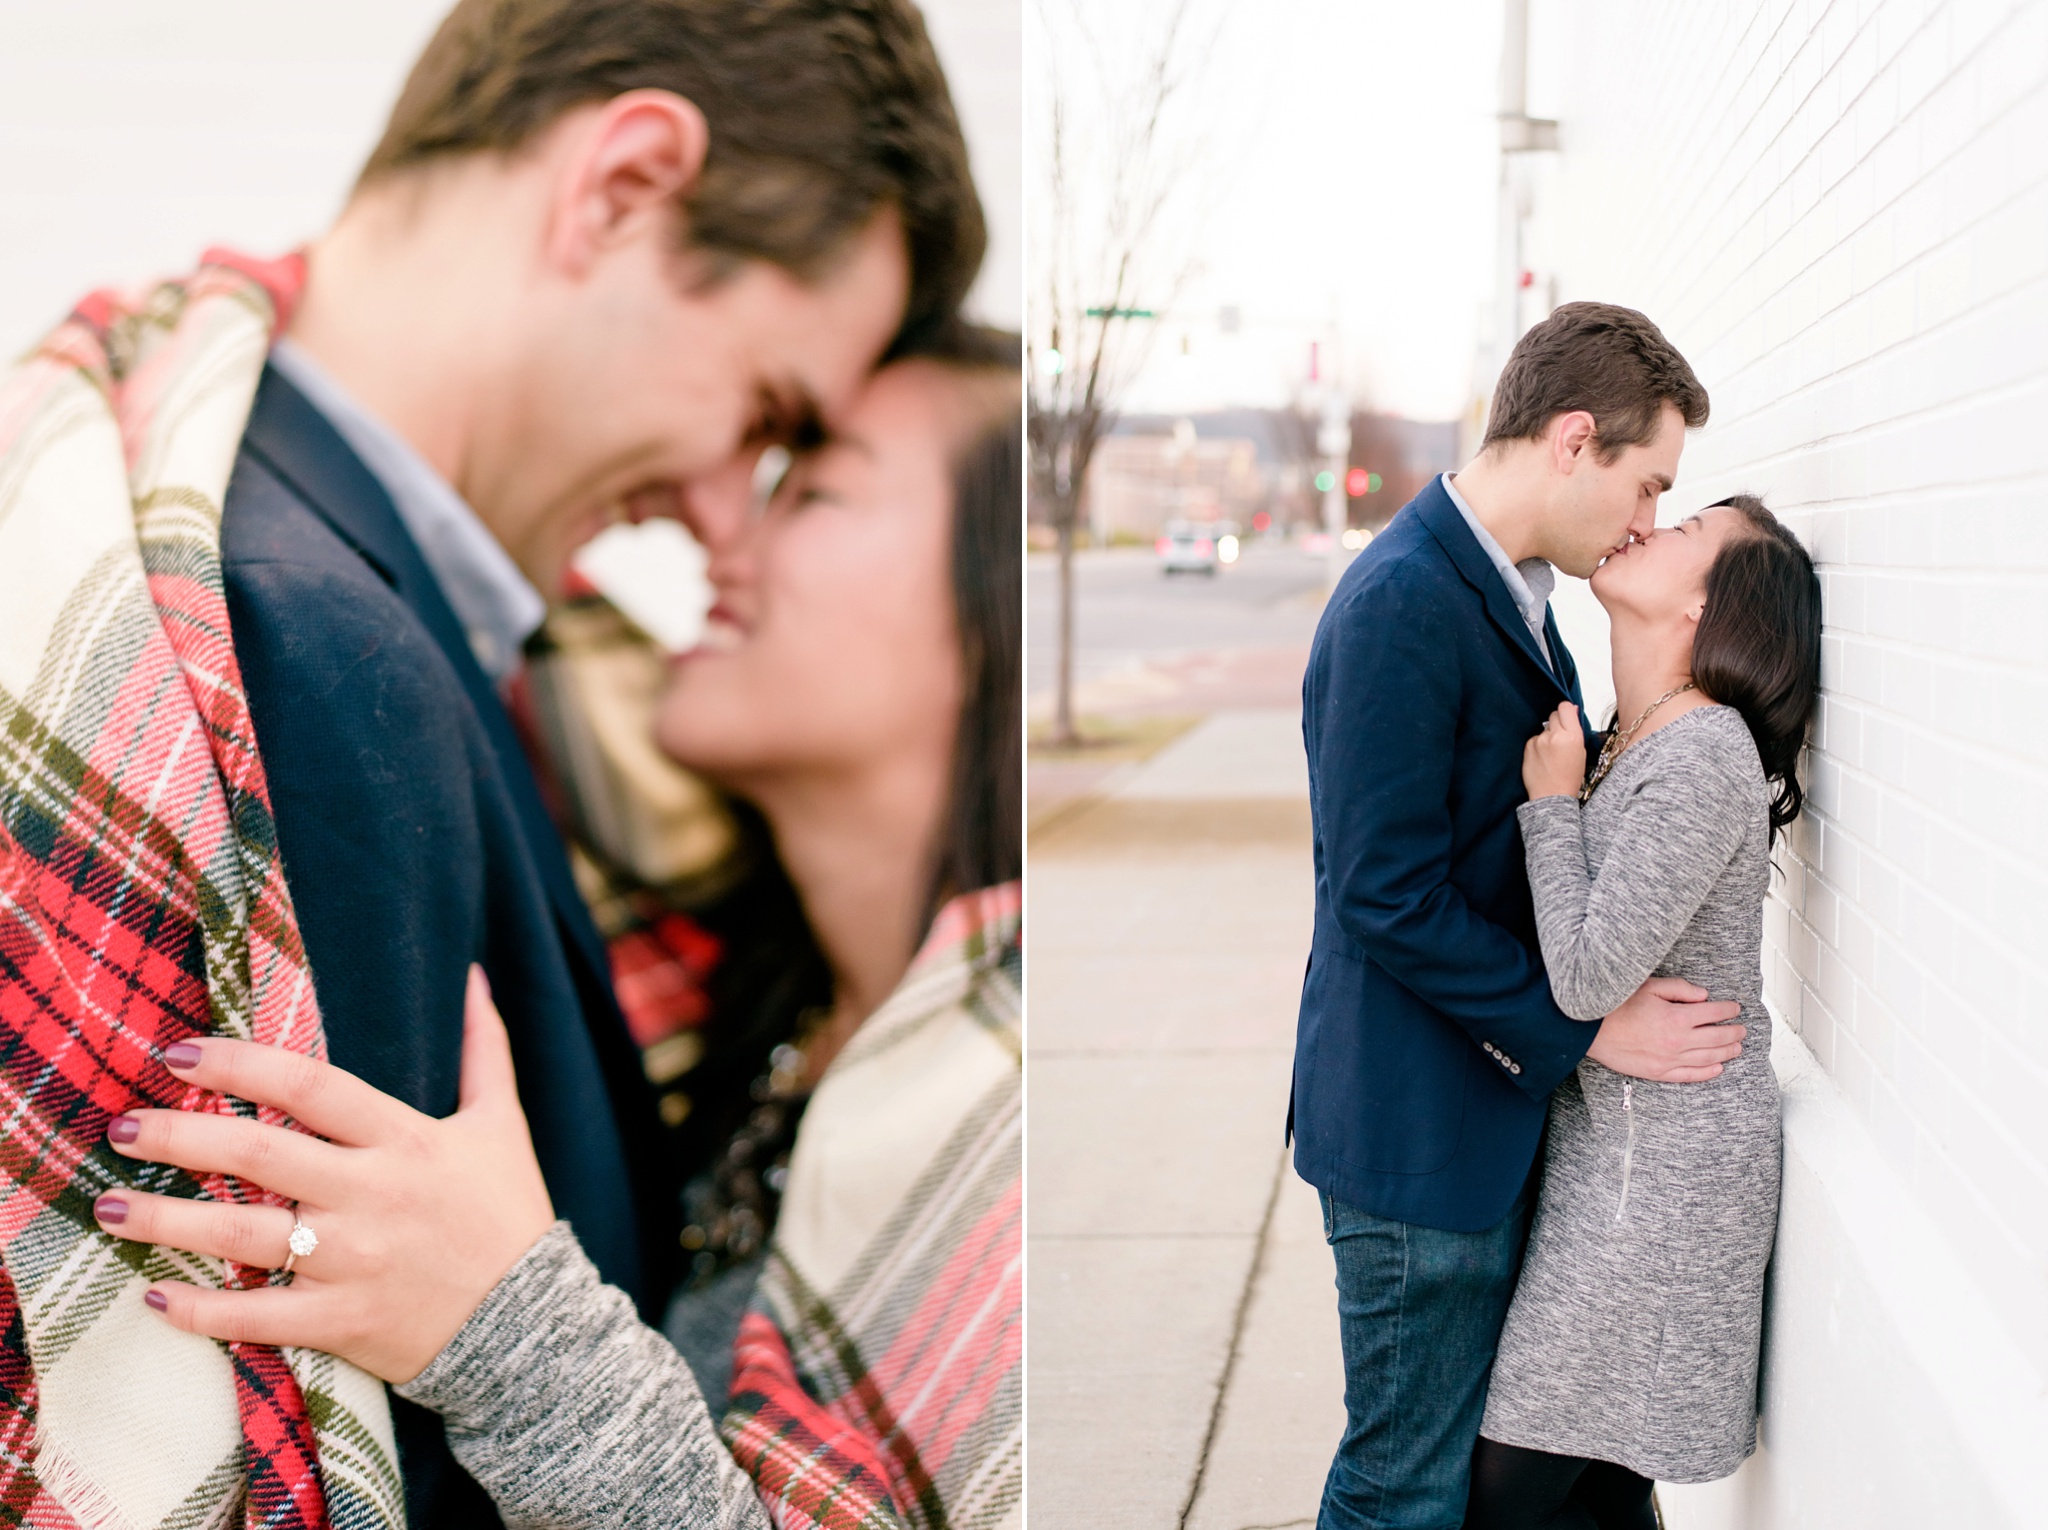 Downtown Nice to Have You in Birmingham Engagement Session| Birmingham Alabama Wedding Photographers_0027.jpg